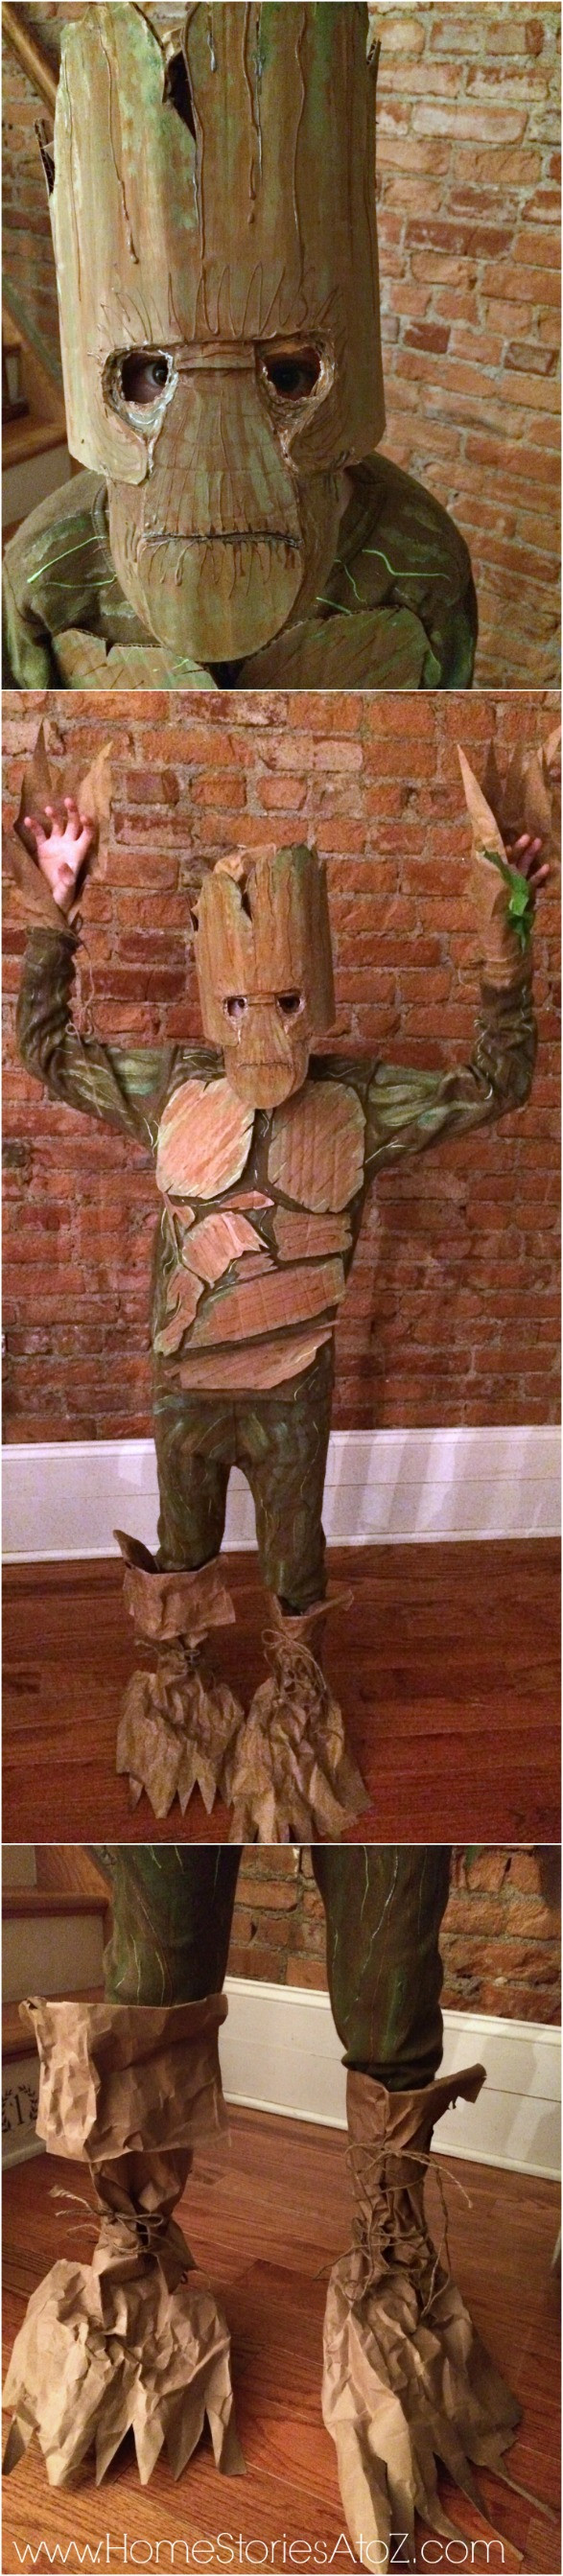 Groot Costume DIY
 Guardians of the Galaxy Costumes